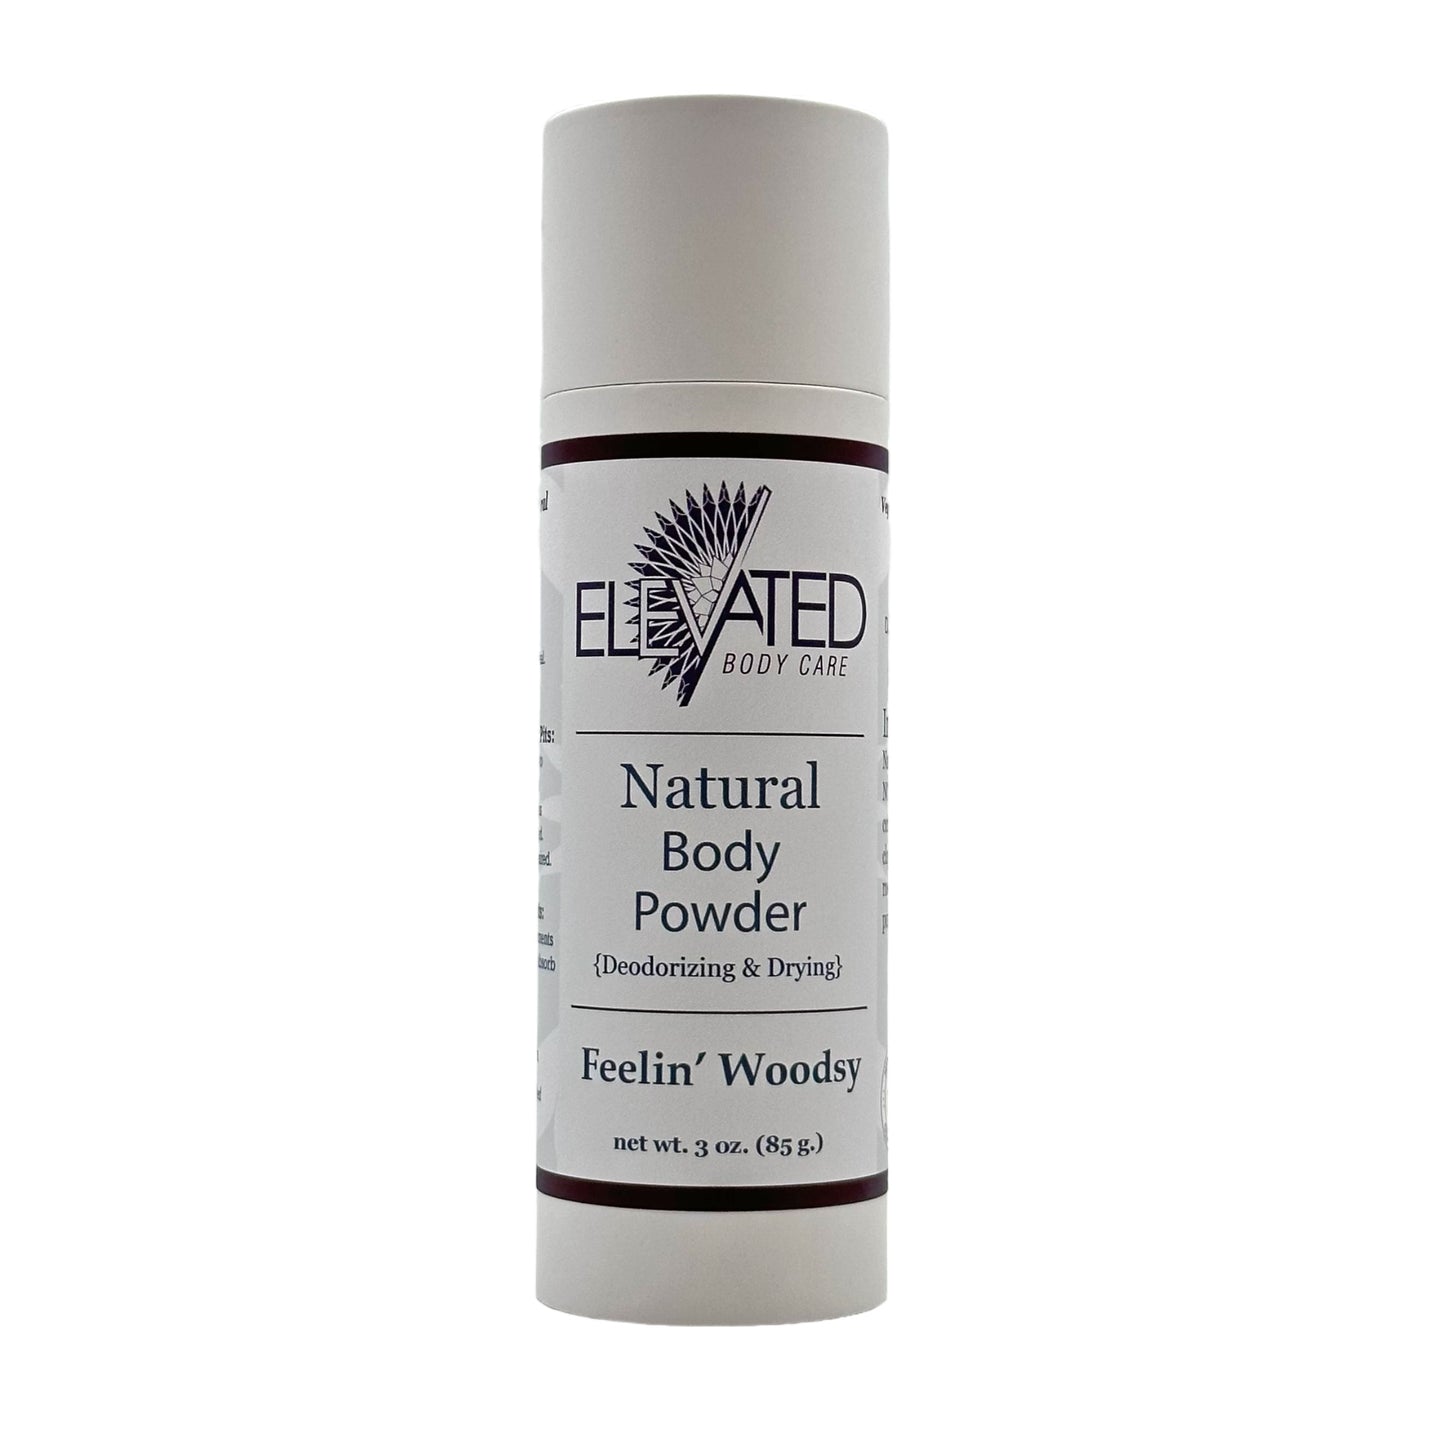 ELEVATED - Herbal Body Powder (All Natural * Talc Free)